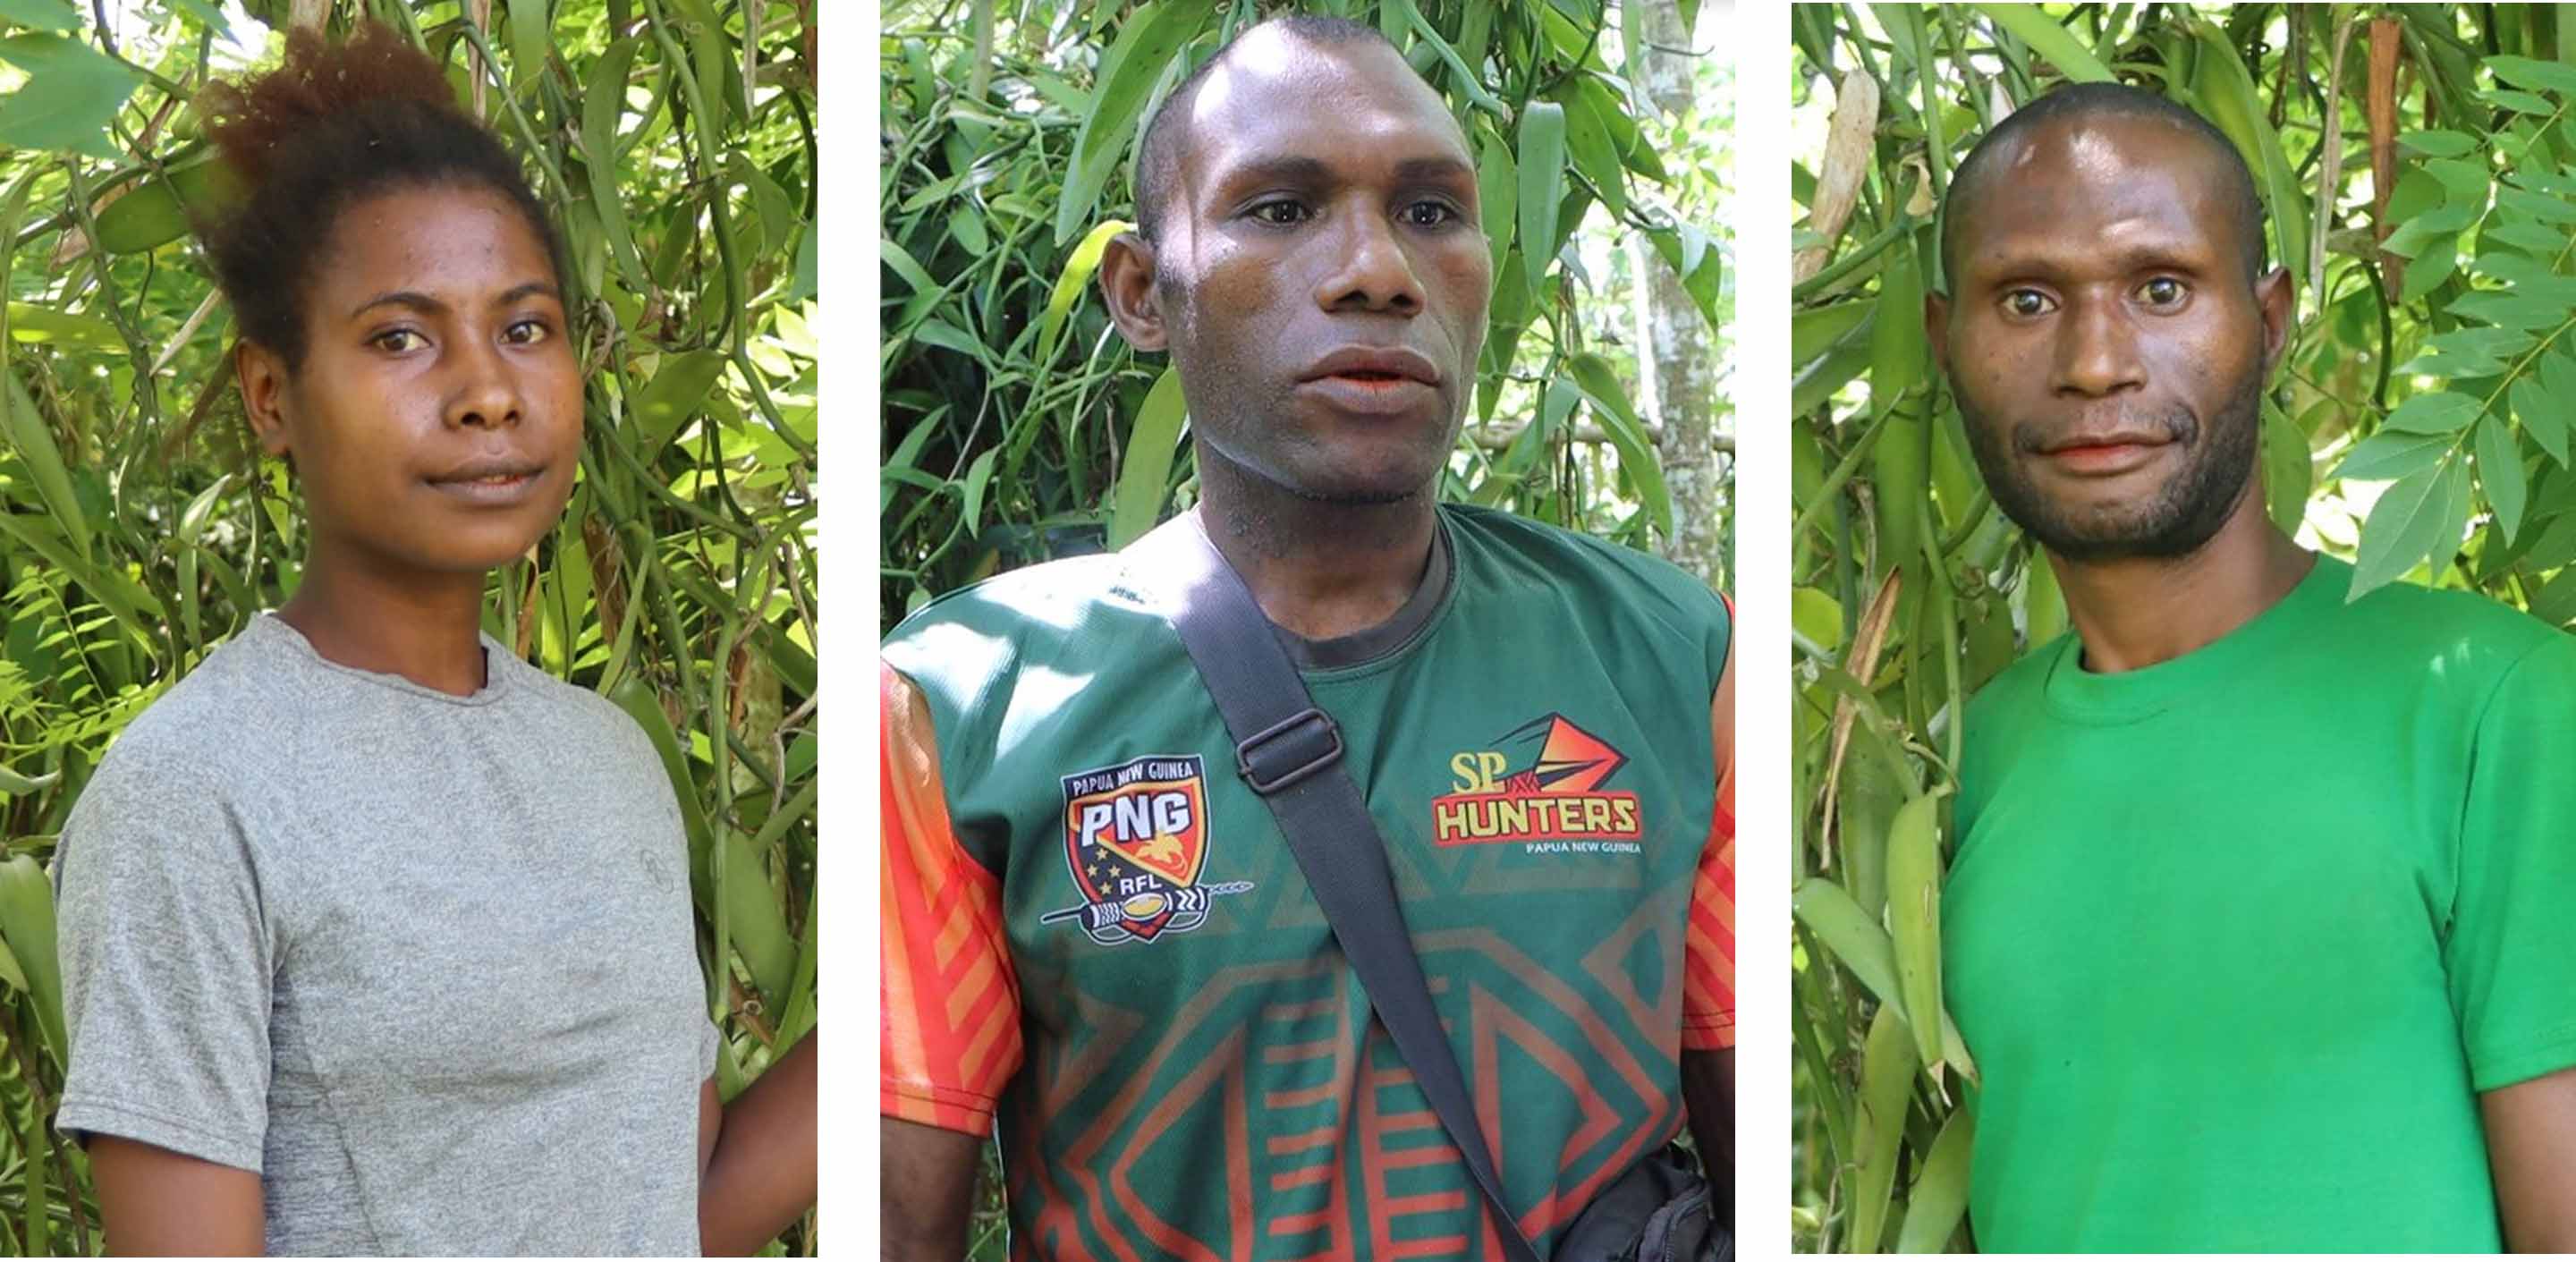 Three youths, Jenelyn, Joel and Nicodemas, from Mandi village in East Sepik Province, Papua New Guinea, established an e-marketplace for the village MSME.